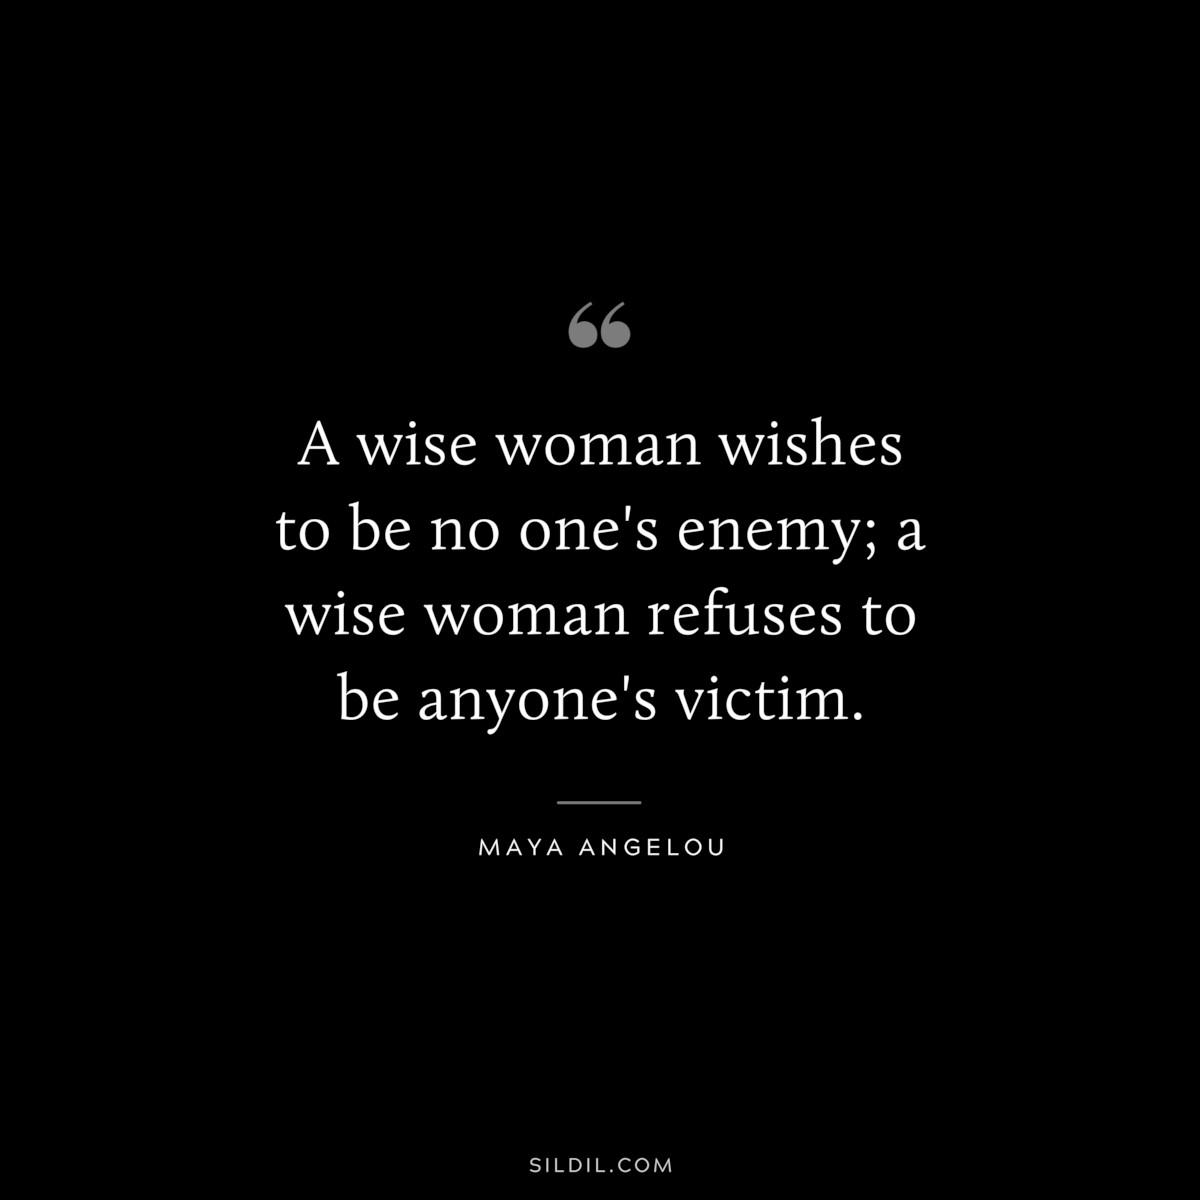 A wise woman wishes to be no one's enemy; a wise woman refuses to be anyone's victim. ― Maya Angelou